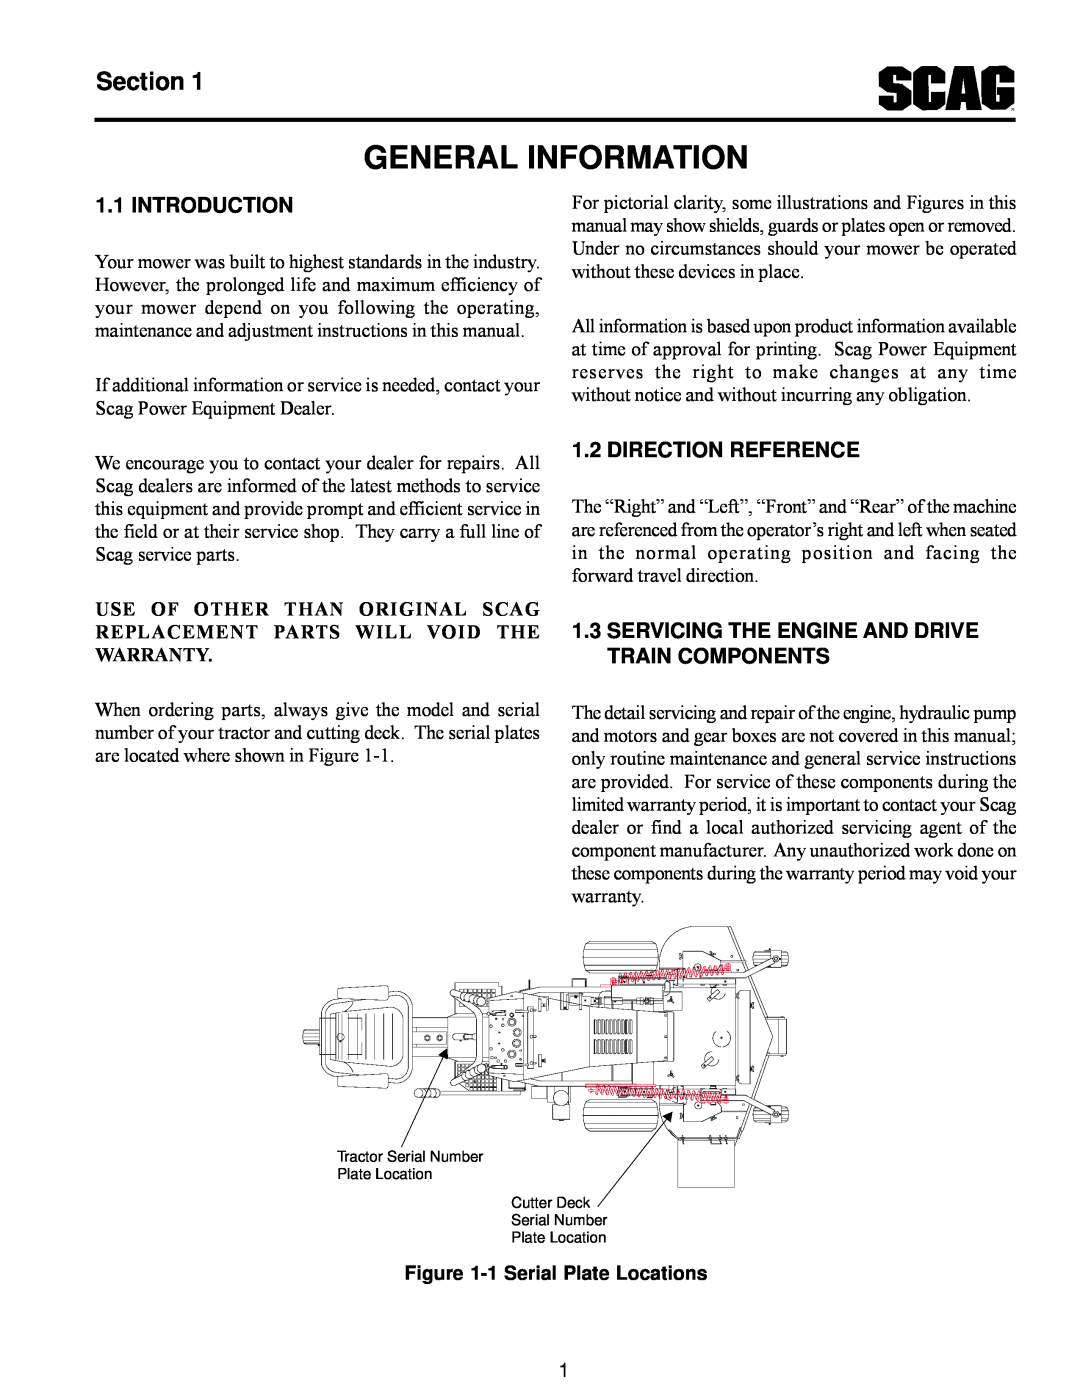 Scag Power Equipment MAG manual General Information, Section, Introduction, Direction Reference, 1 Serial Plate Locations 